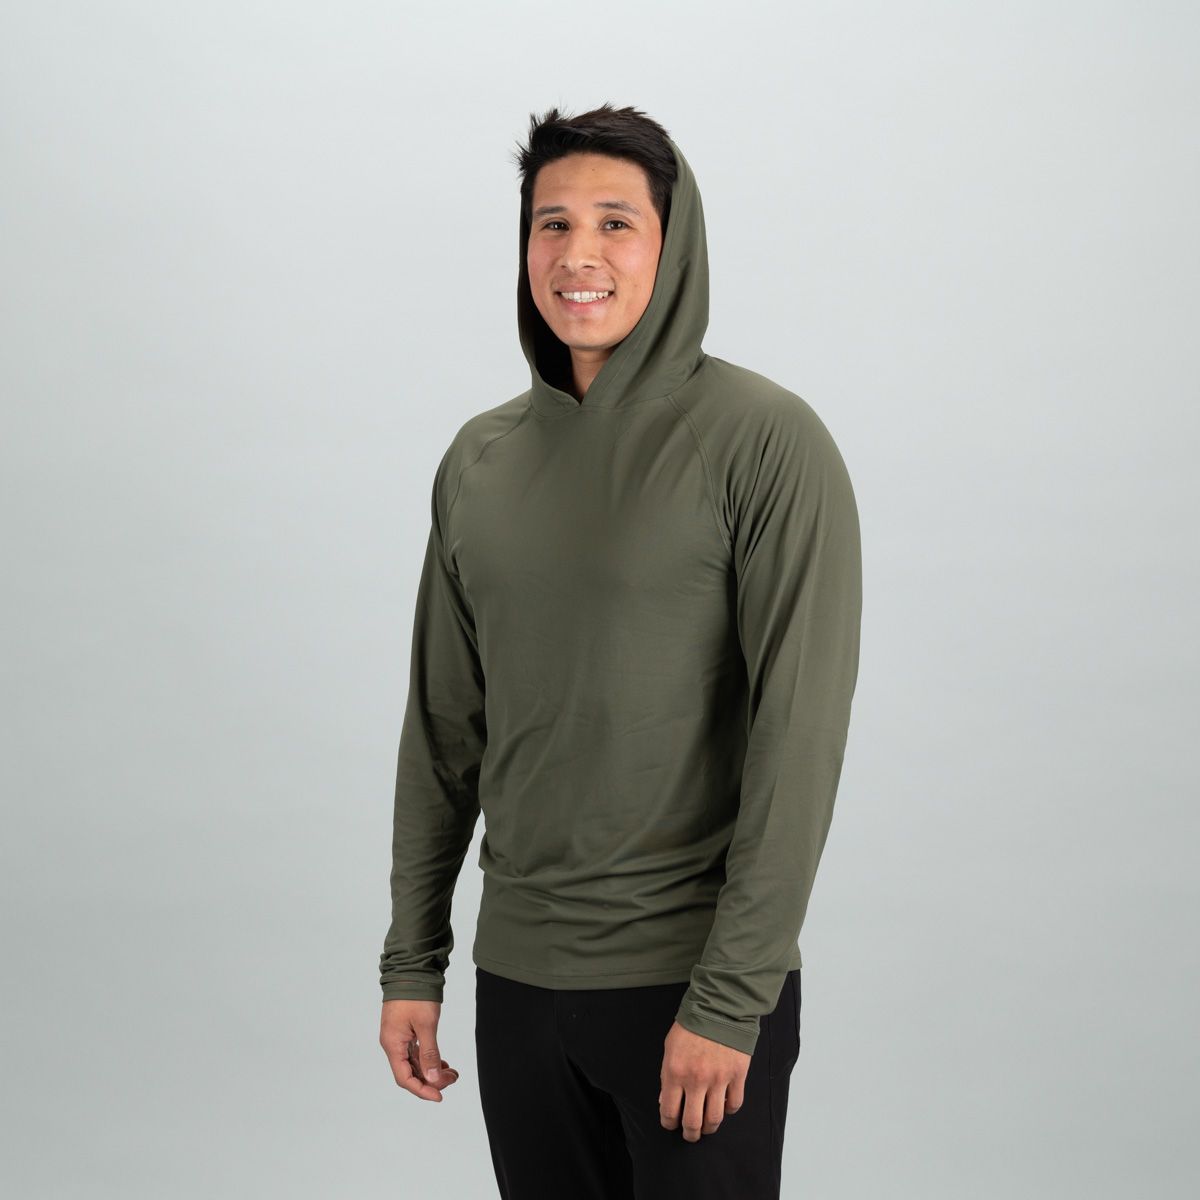 GOHUNT Approach Hoodie in Olive by GOHUNT | GOHUNT - GOHUNT Shop